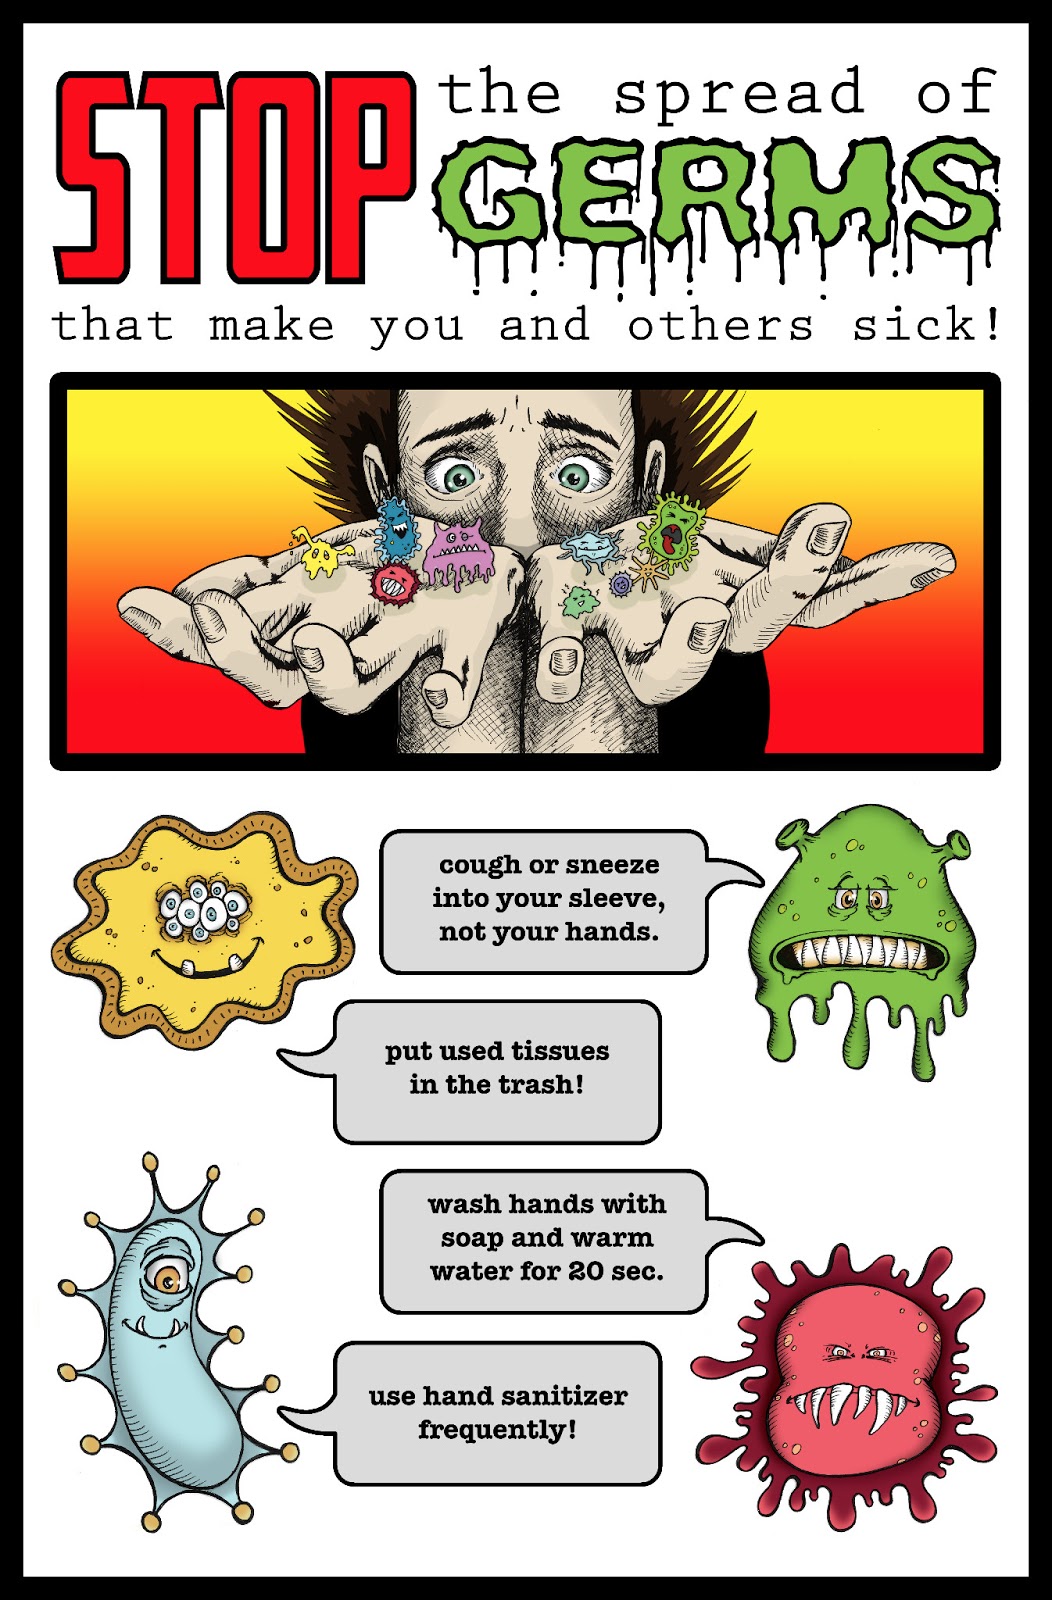 Face the consequences of Germs. Discovery of Germs was made in. Halt the spread of STH.